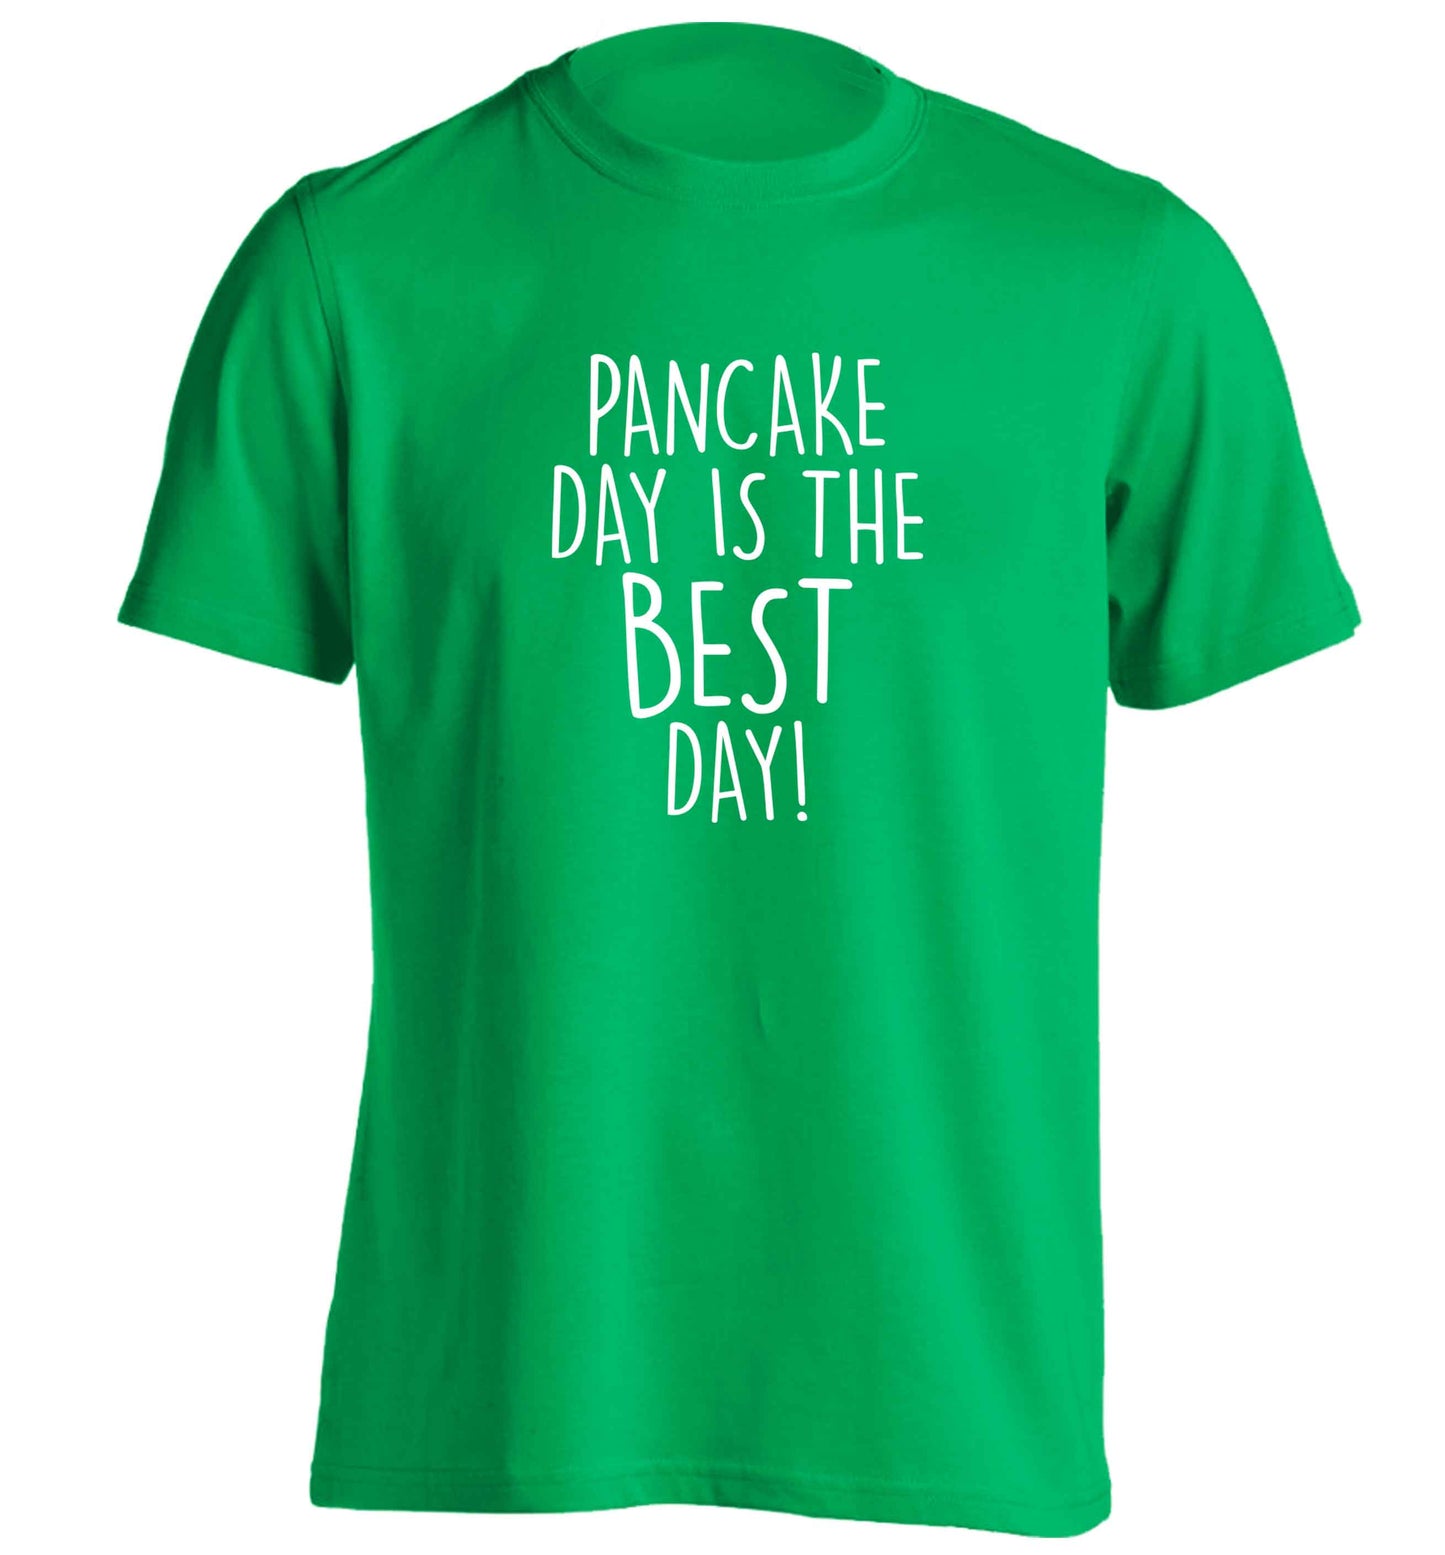 Pancake day is the best day adults unisex green Tshirt 2XL